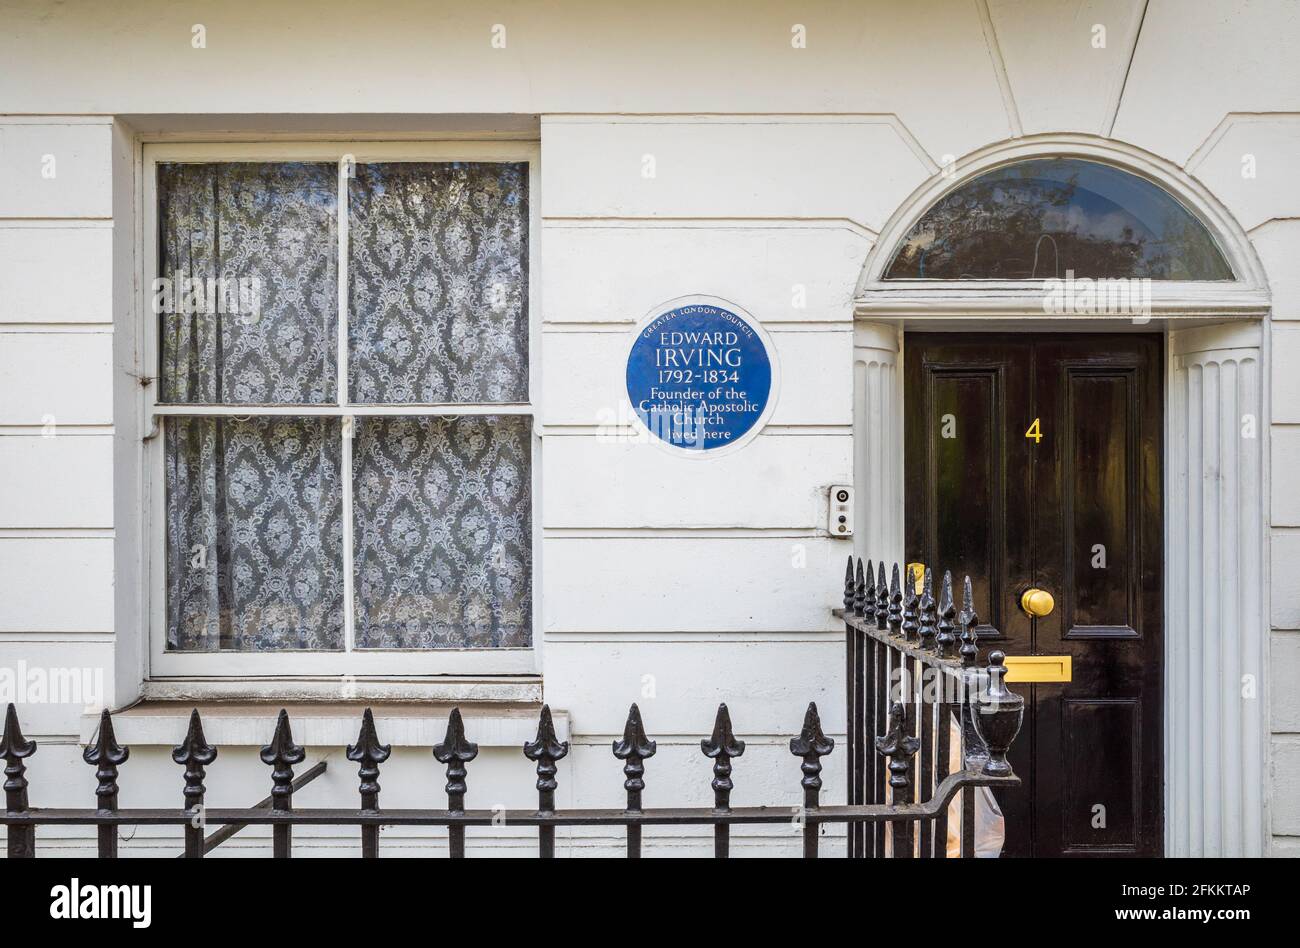 Edward Irving London Blue Plaque - Edward Irving, 1792-1834, Preacher & founder of the Catholic Apostolic Church lived at this house on 4 Claremont Sq. Stock Photo